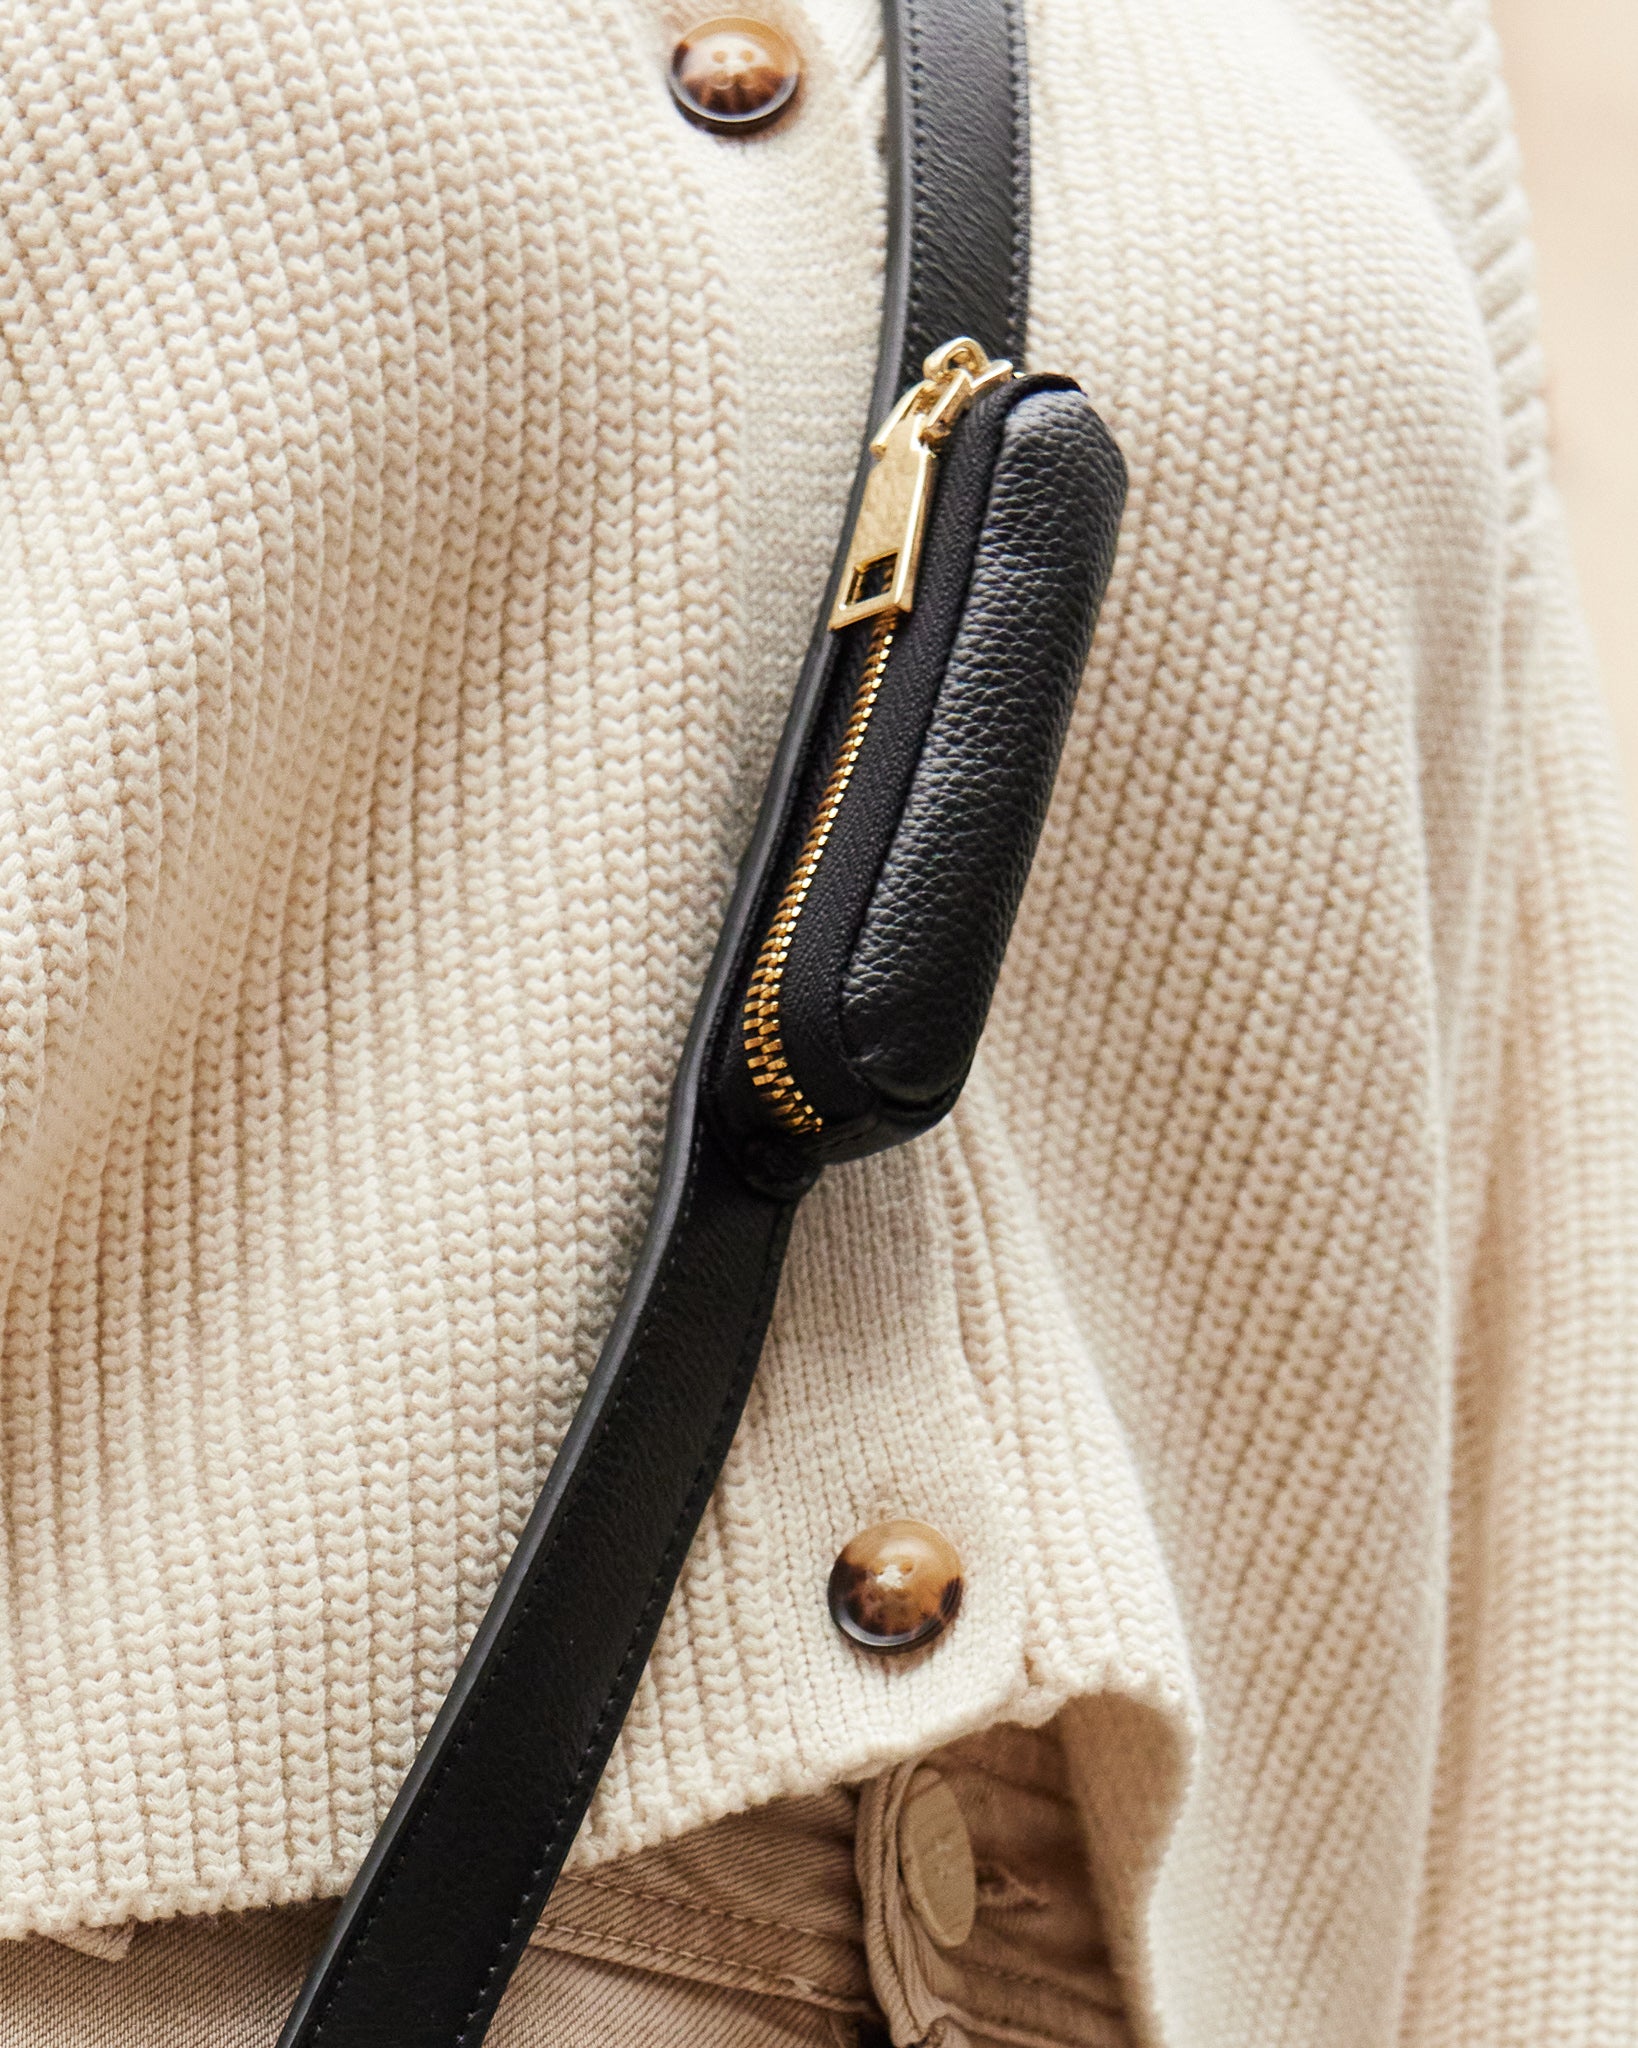 Holstere Utility Strap with Zipper Lipstick Pouch and Length